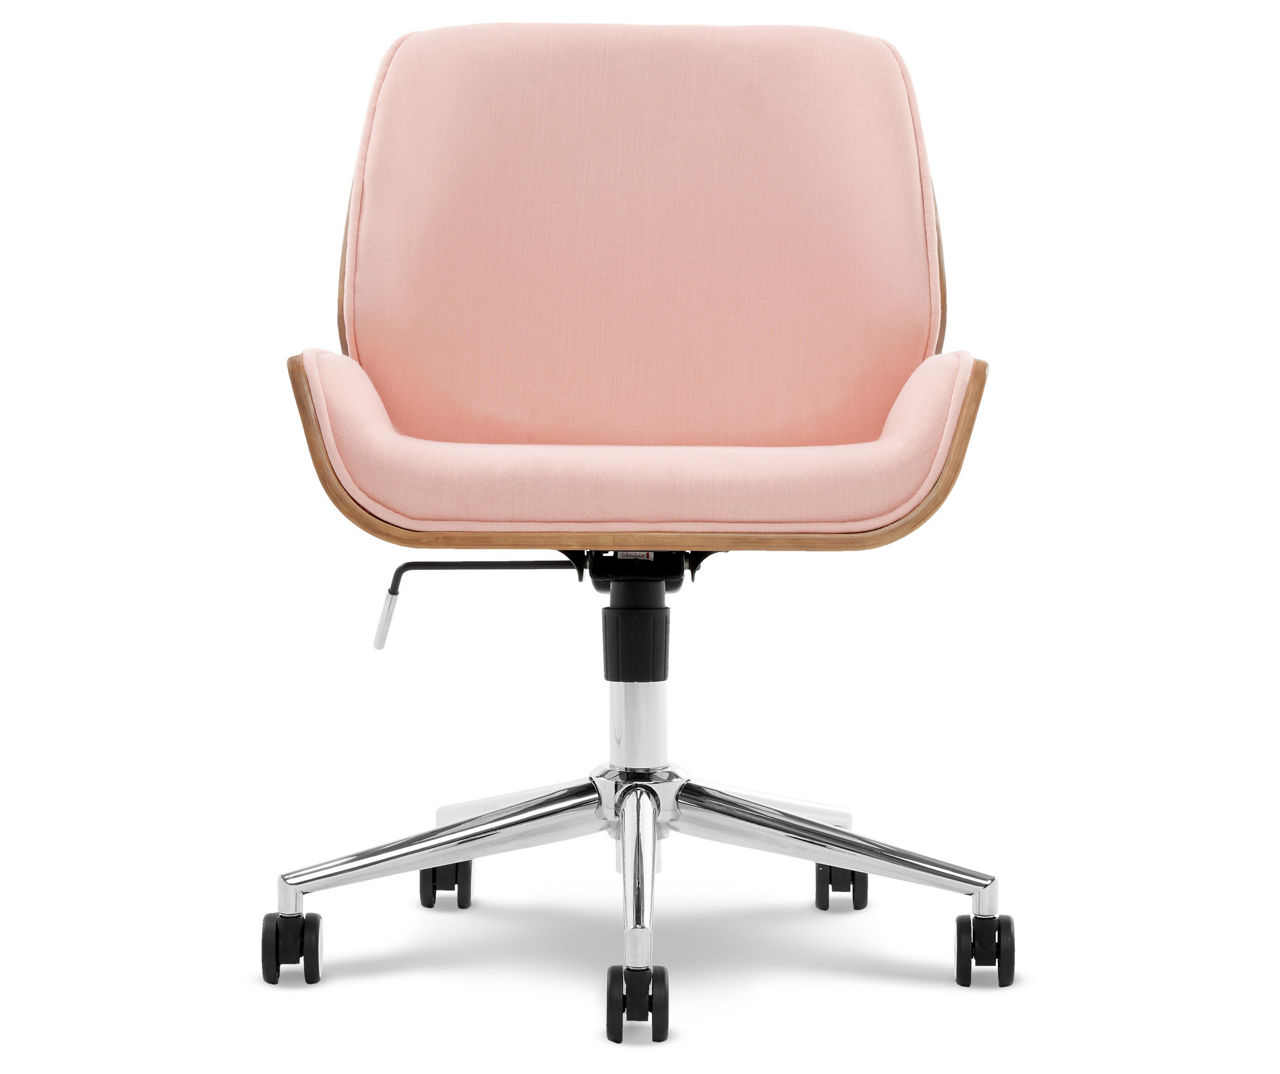 Ophelia Blush Pink Fabric Office Chair | Big Lots